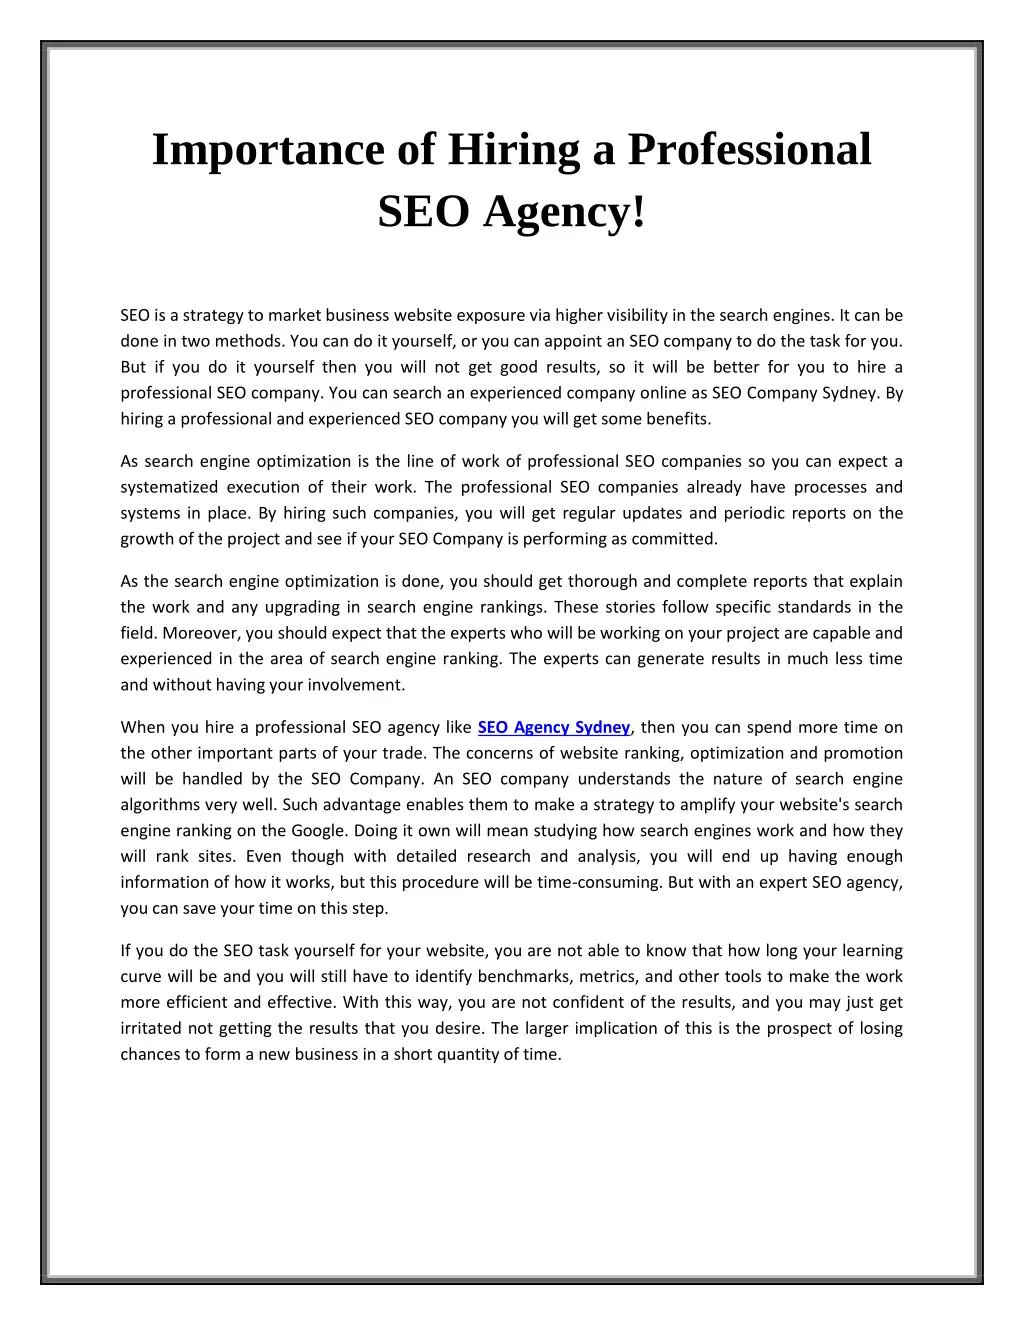 importance of hiring a professional seo agency